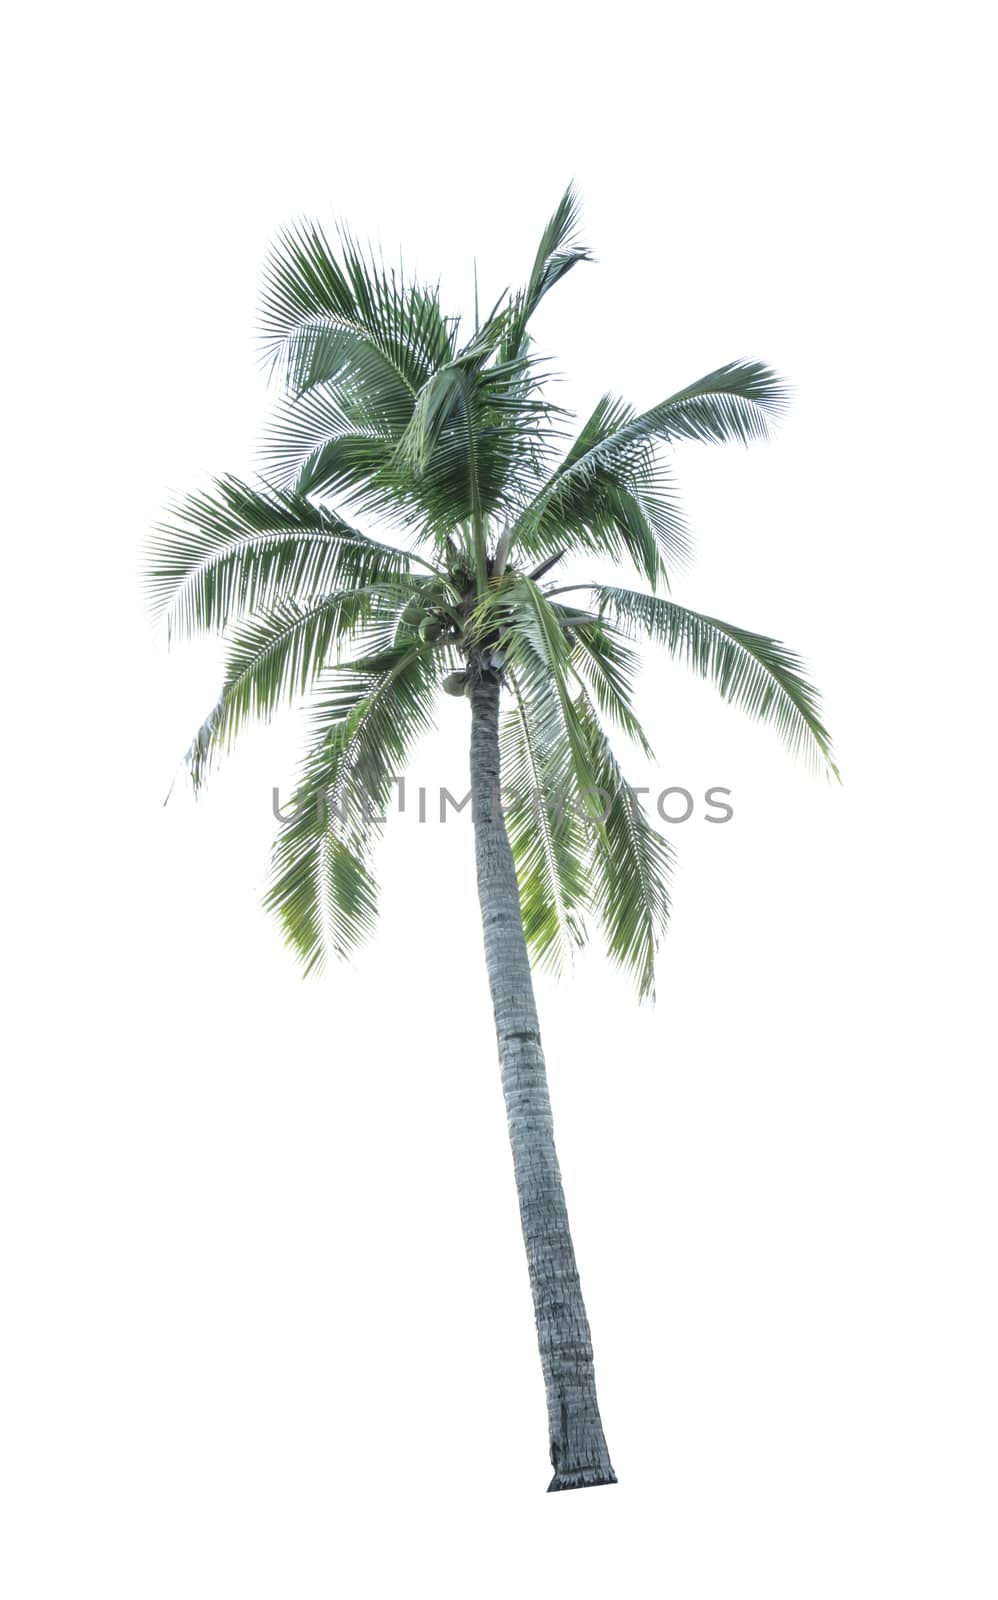 Coconut tree isolated on white background used for advertising decorative architecture. Summer and beach concept